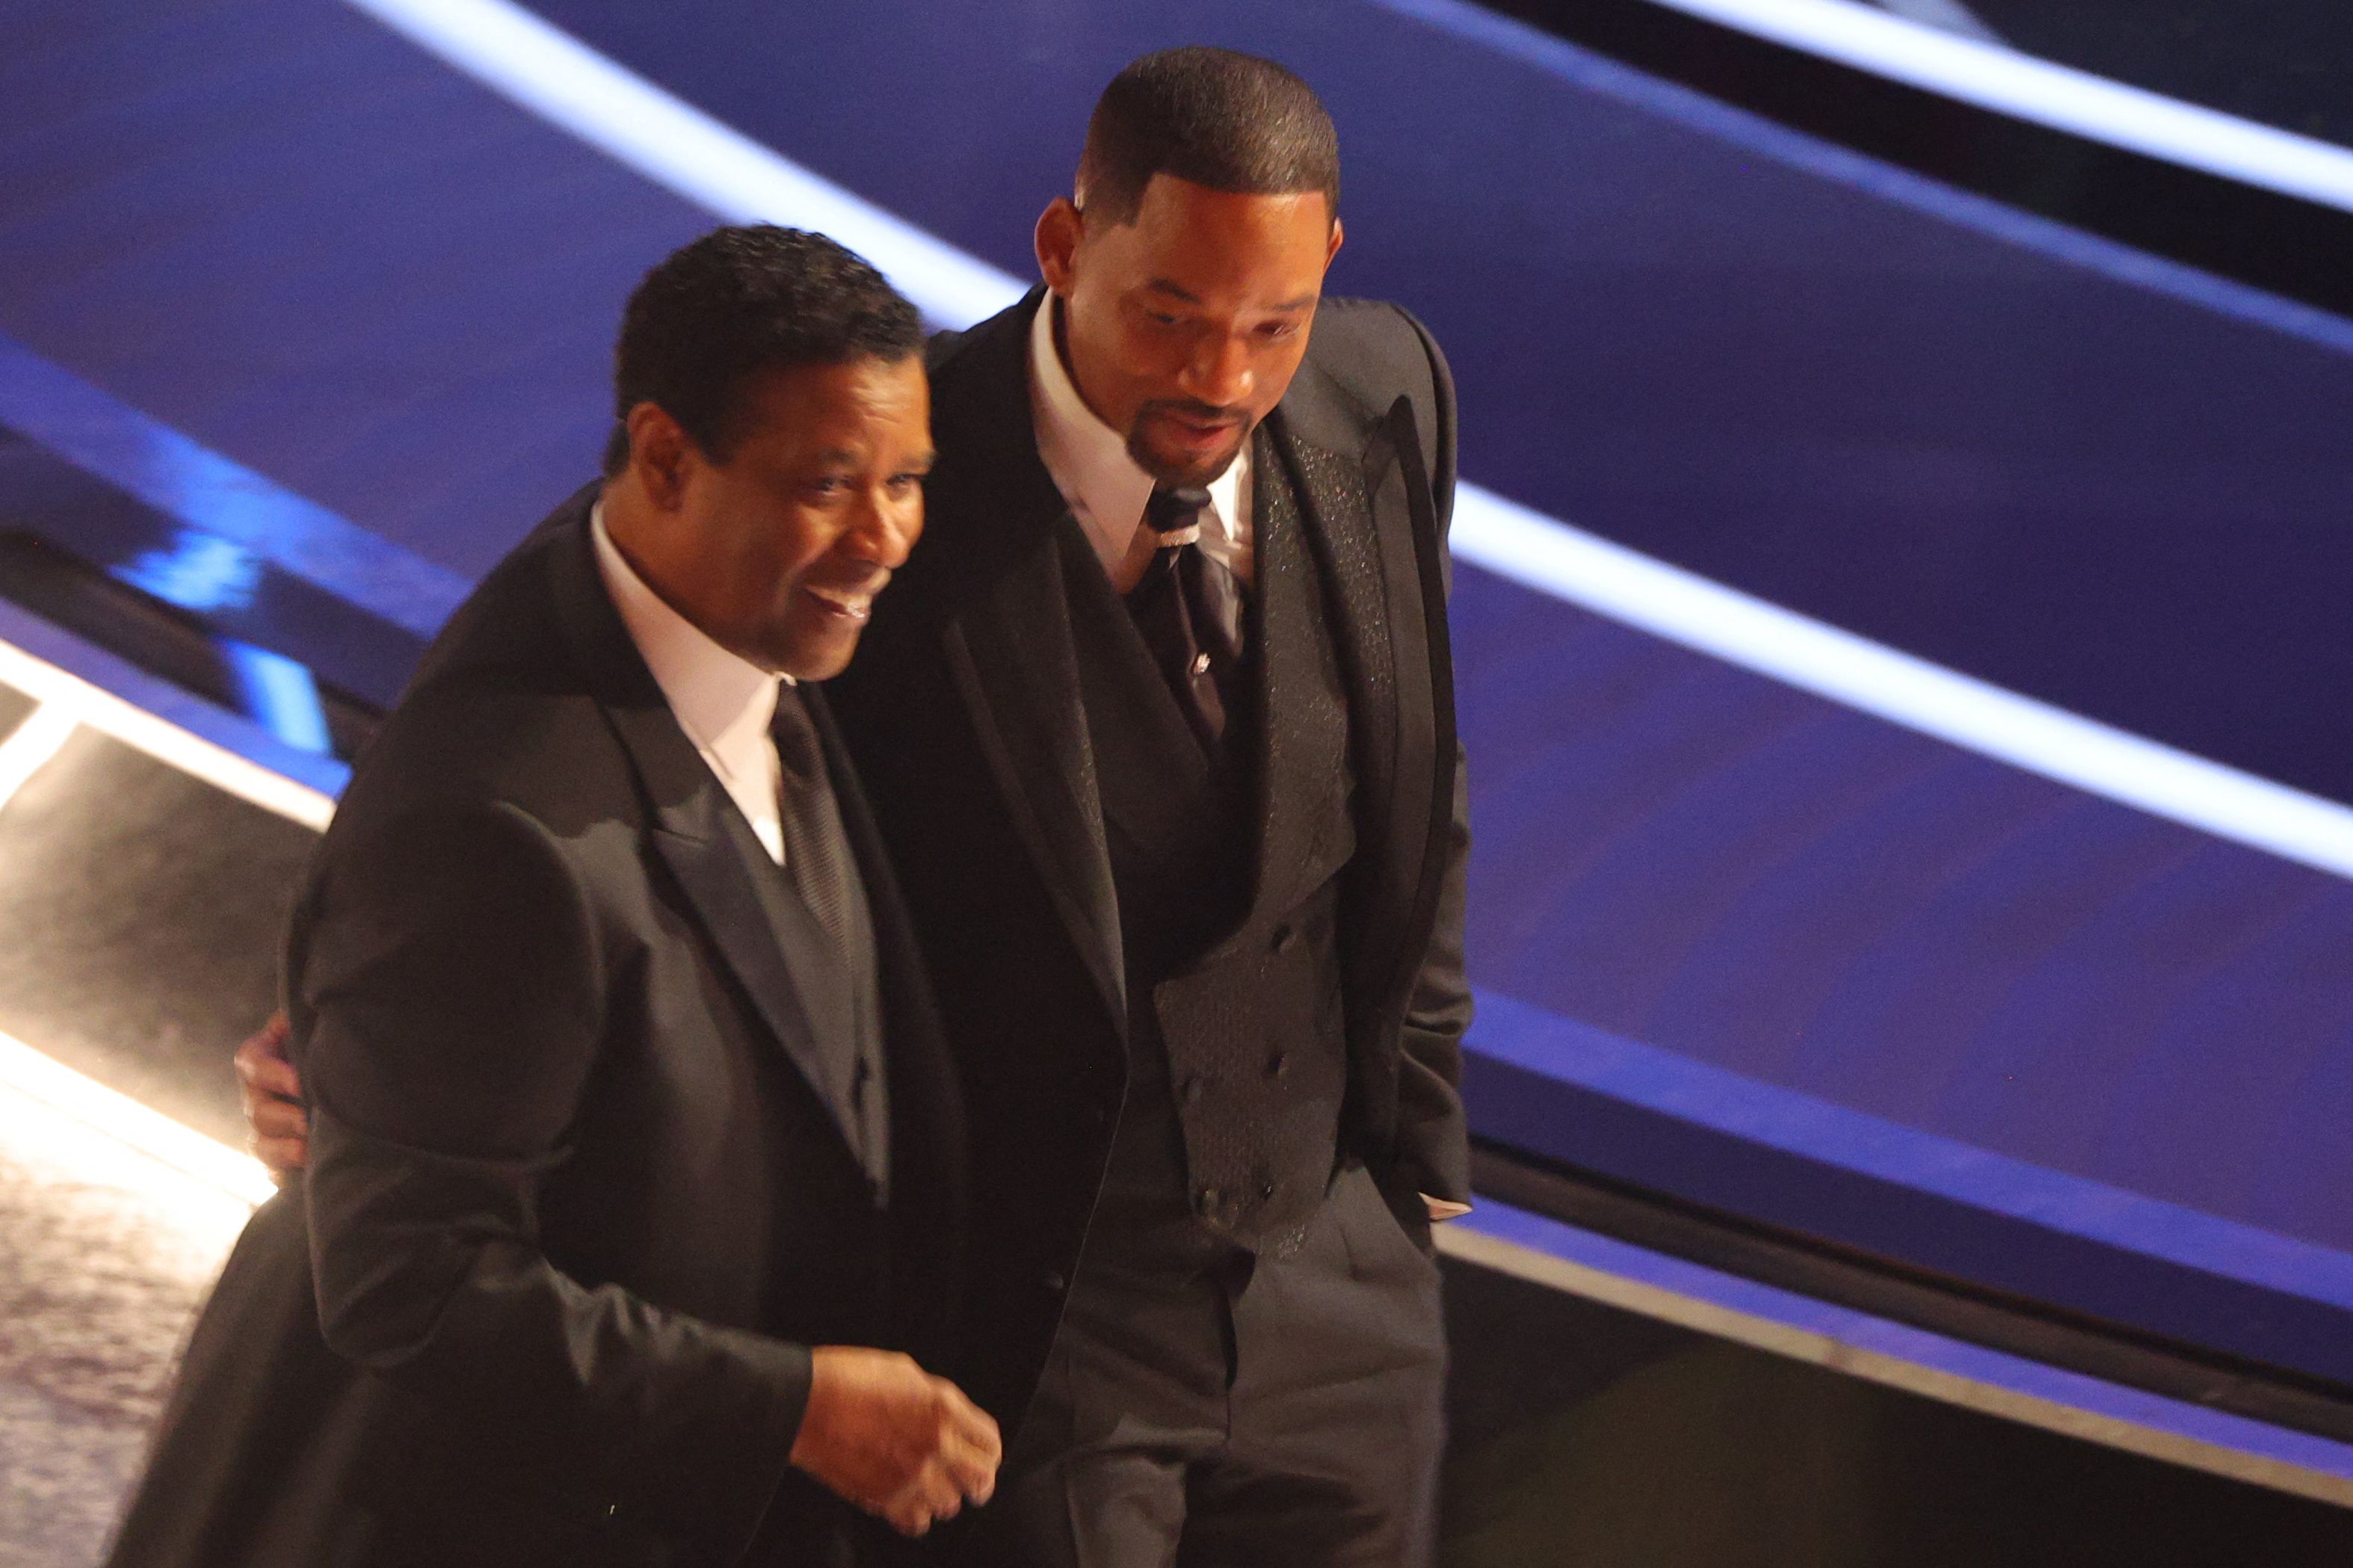 Denzel Washington (L) walks with Will Smith after Smith hit Chris Rock (not pictured) as Rock spoke on stage during the 94th Academy Awards in Hollywood, Los Angeles, California, U.S., March 27, 2022. REUTERS/Brian Snyder